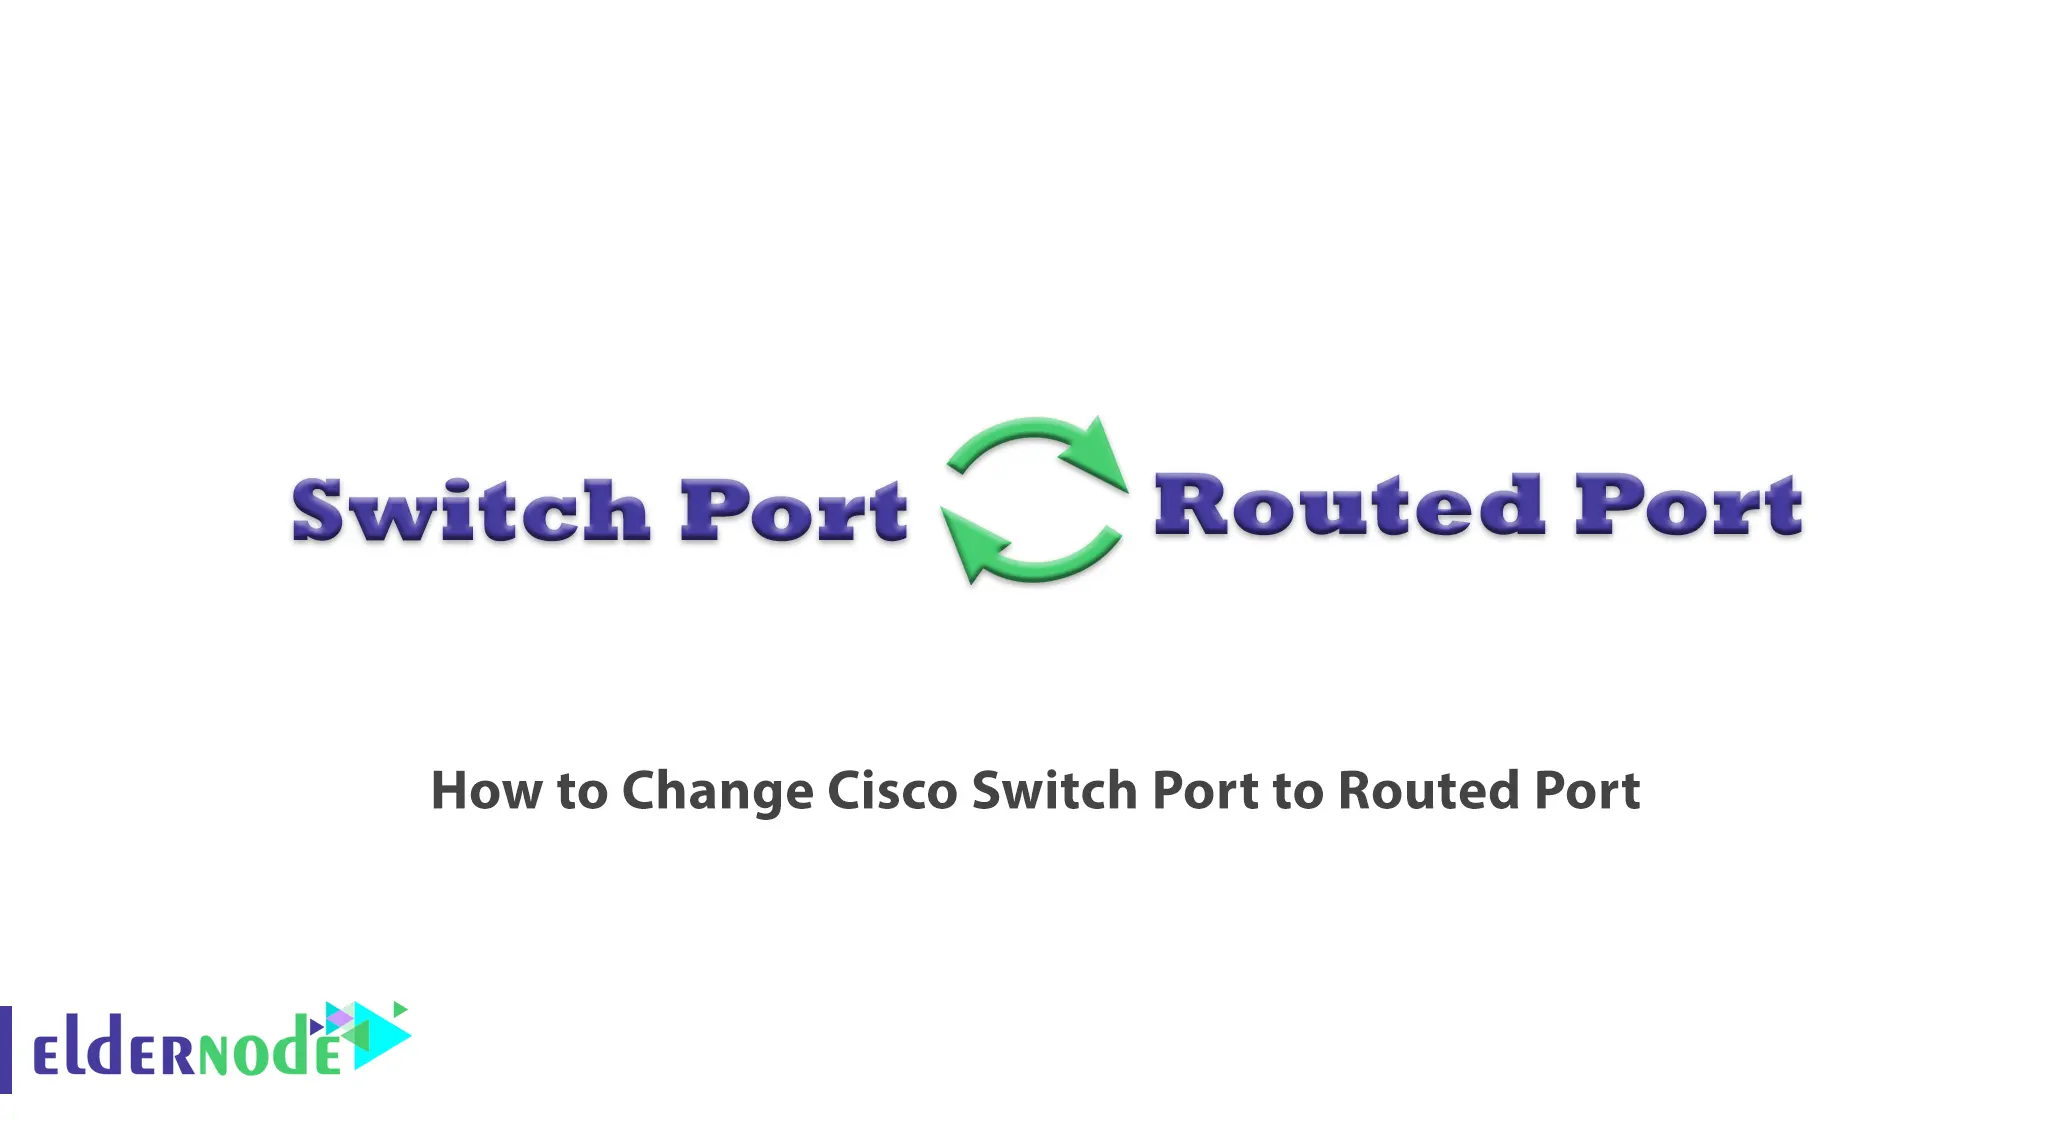 How to Change Cisco Switch Port to Routed Port